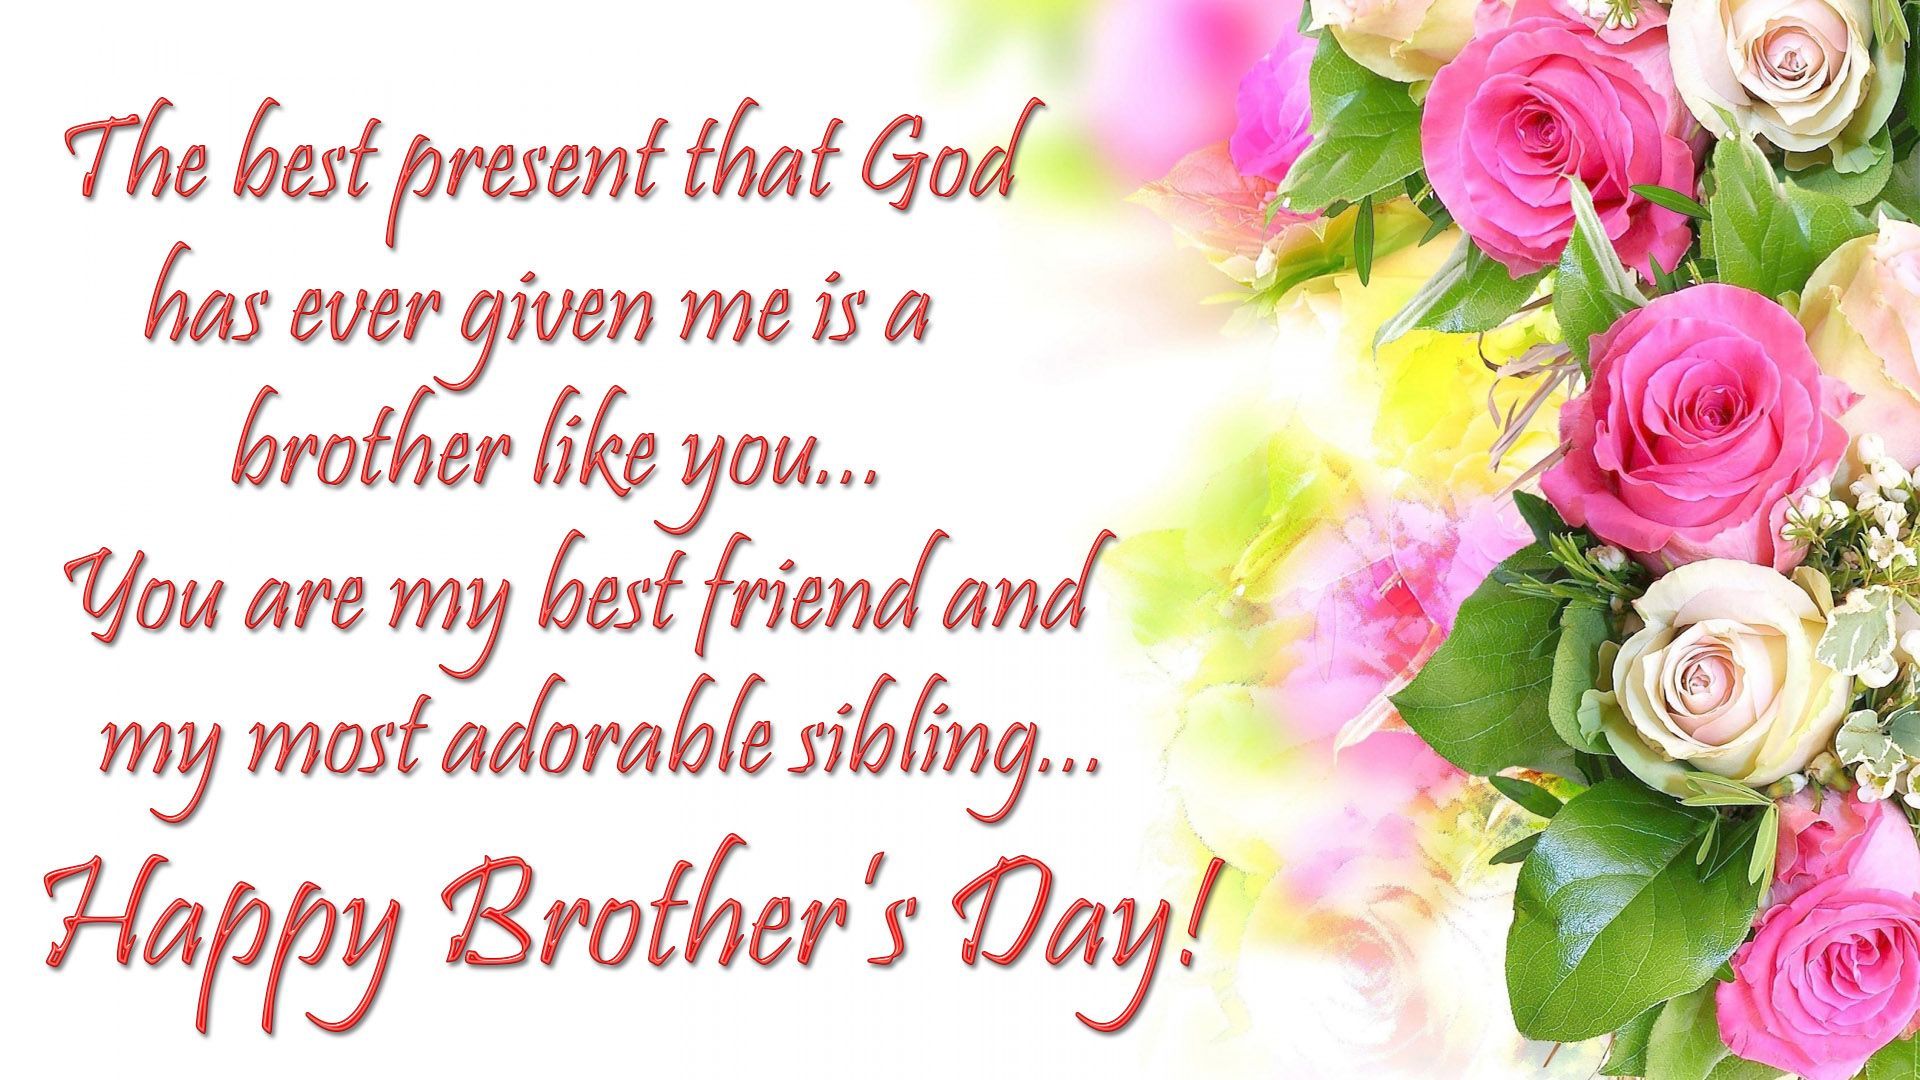 Happy Brothers Day Wishes & Messages Image. Happy brothers day